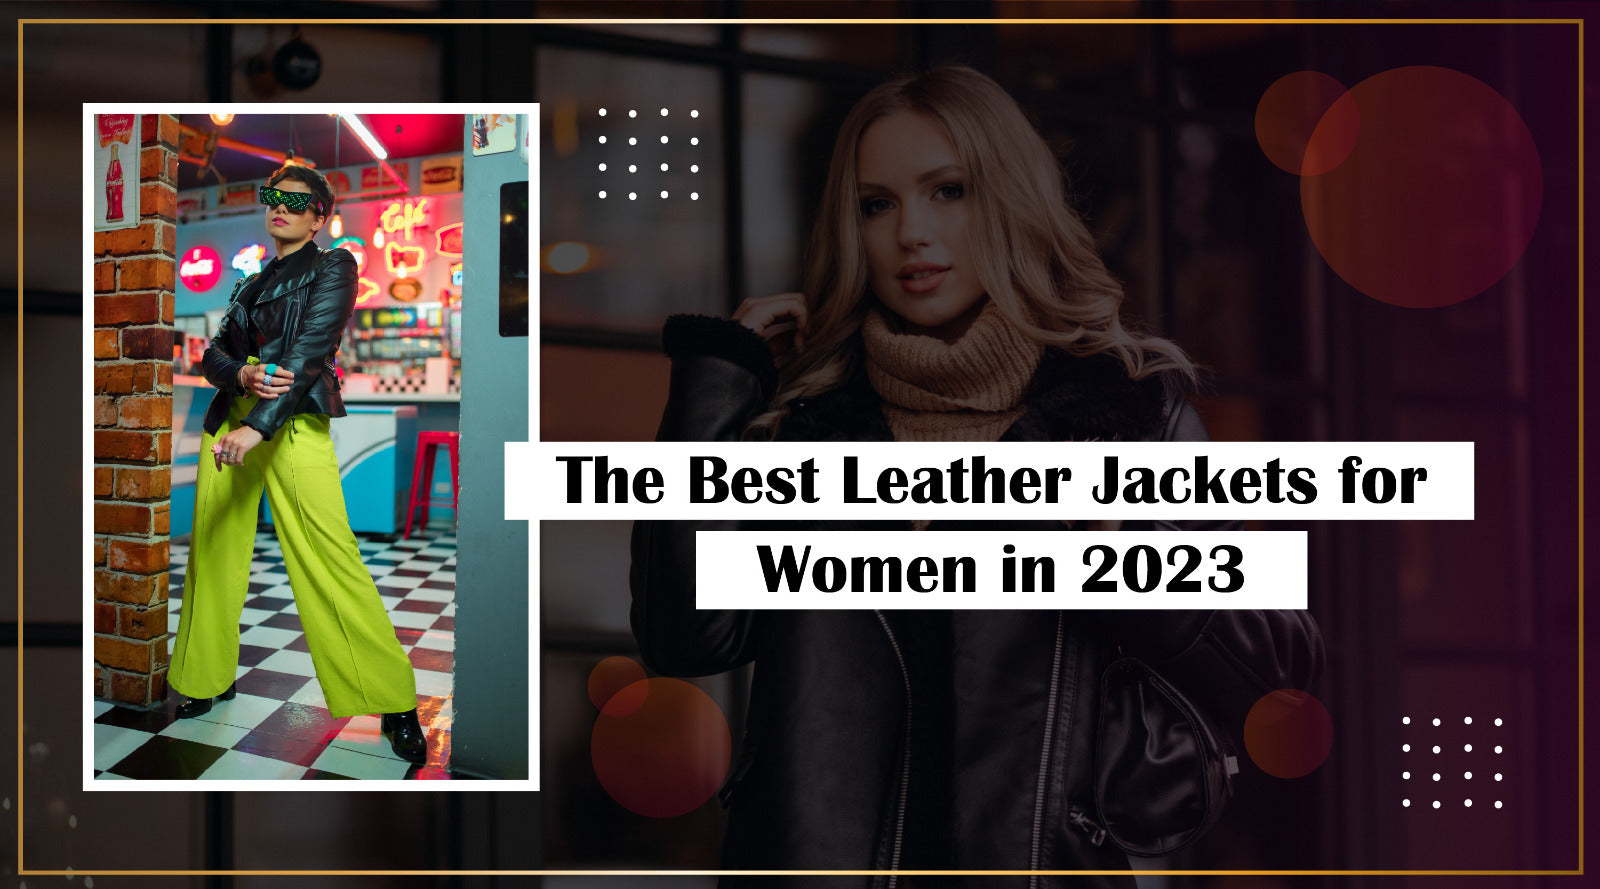 The Best Leather Jackets for Women in 2023